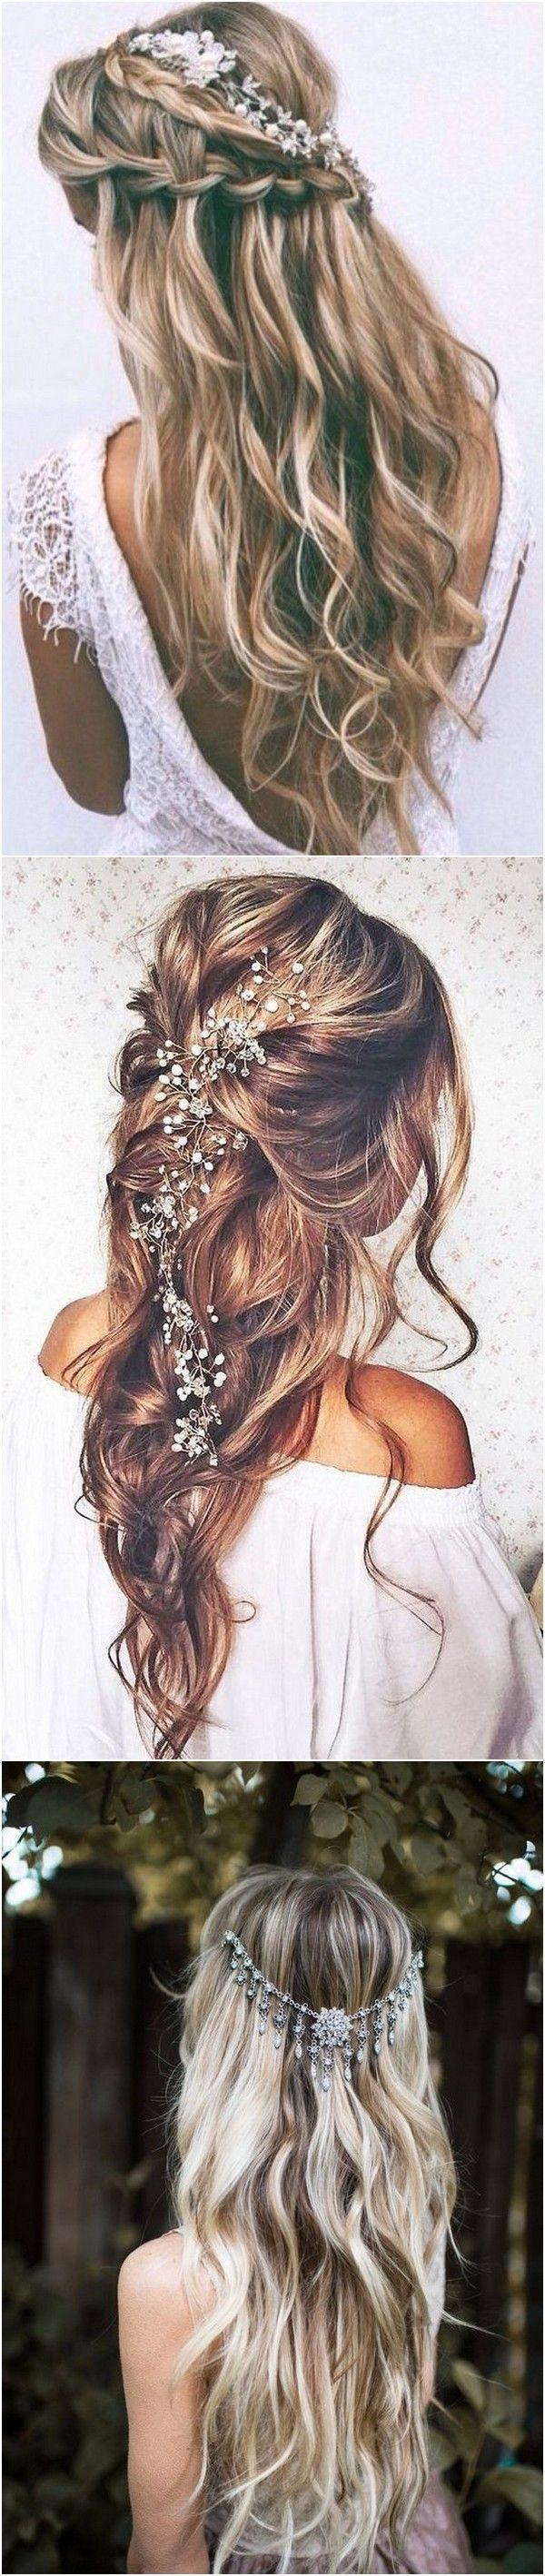 Wedding - 20 Boho Chic Wedding Hairstyles For Your Big Day